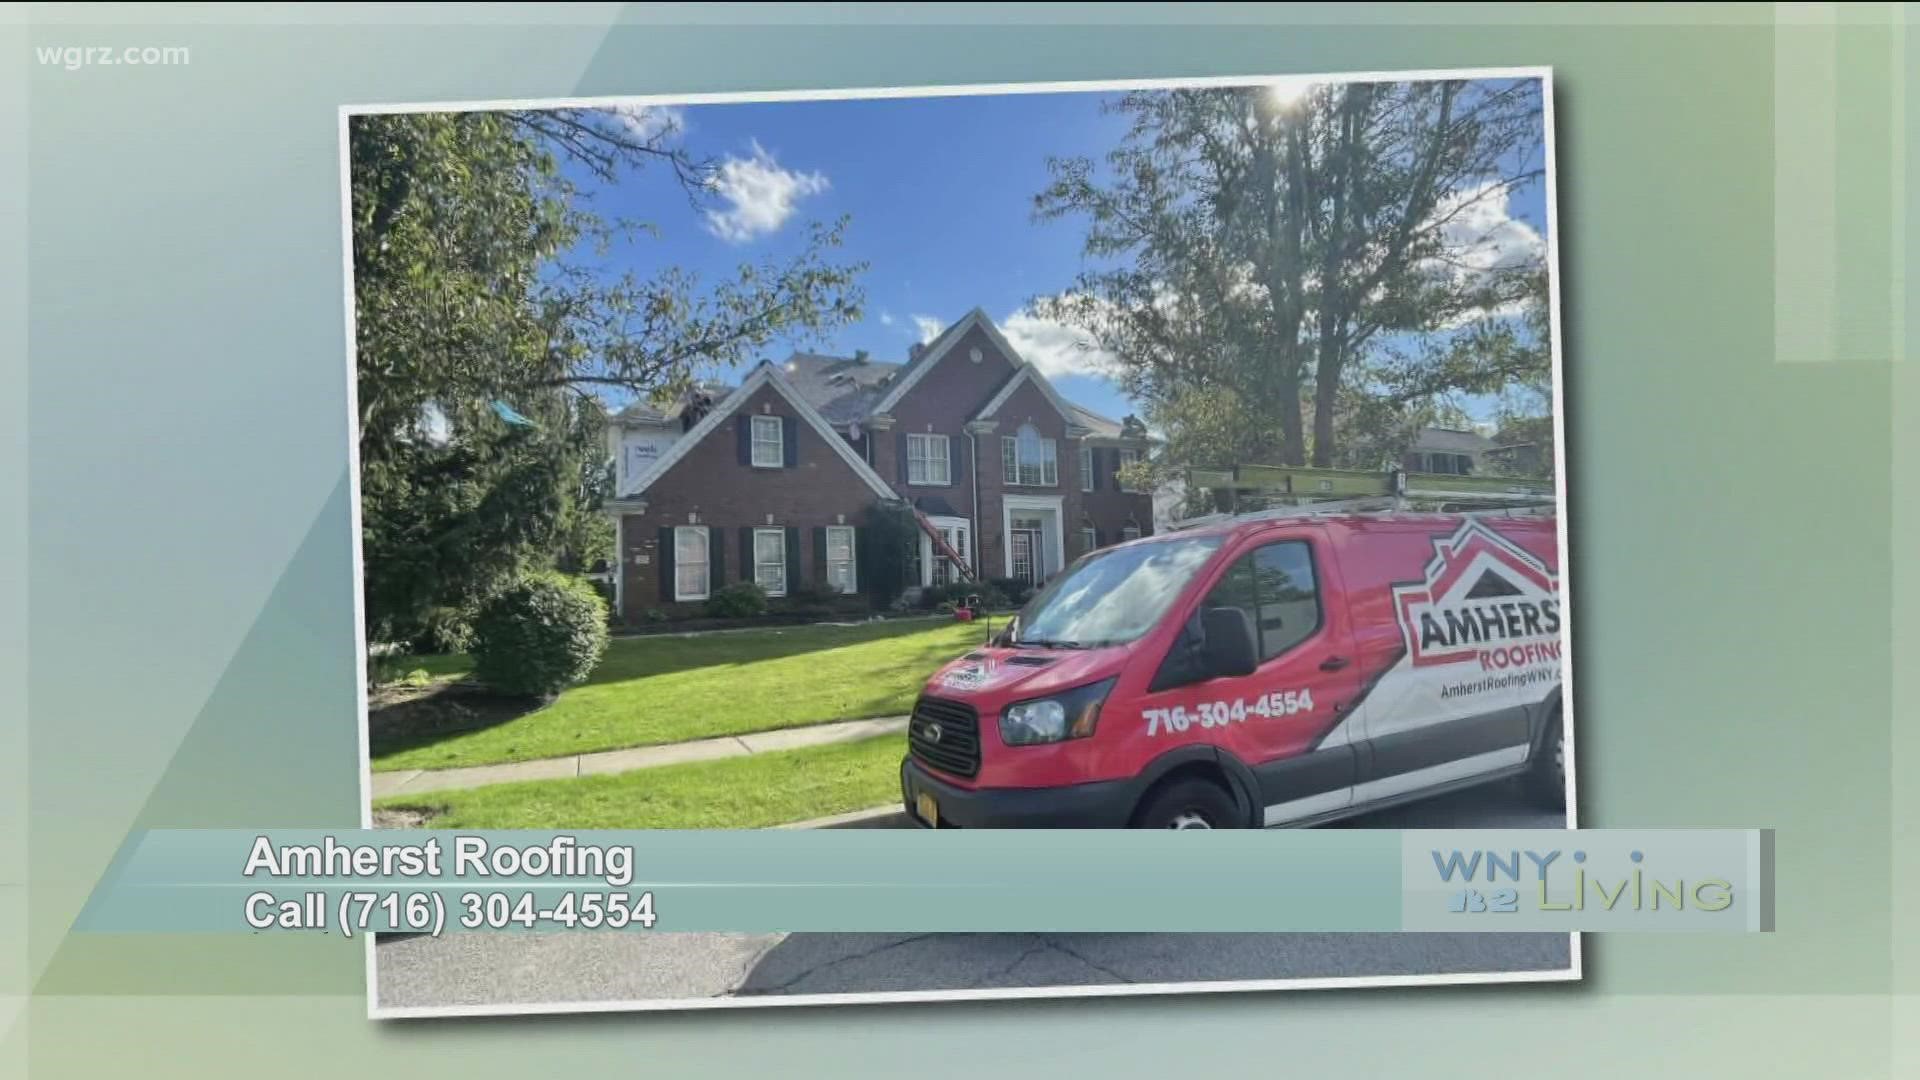 WNY Living - January 22 - Amherst Roofing (THIS VIDEO IS SPONSORED BY AMHERST ROOFING)